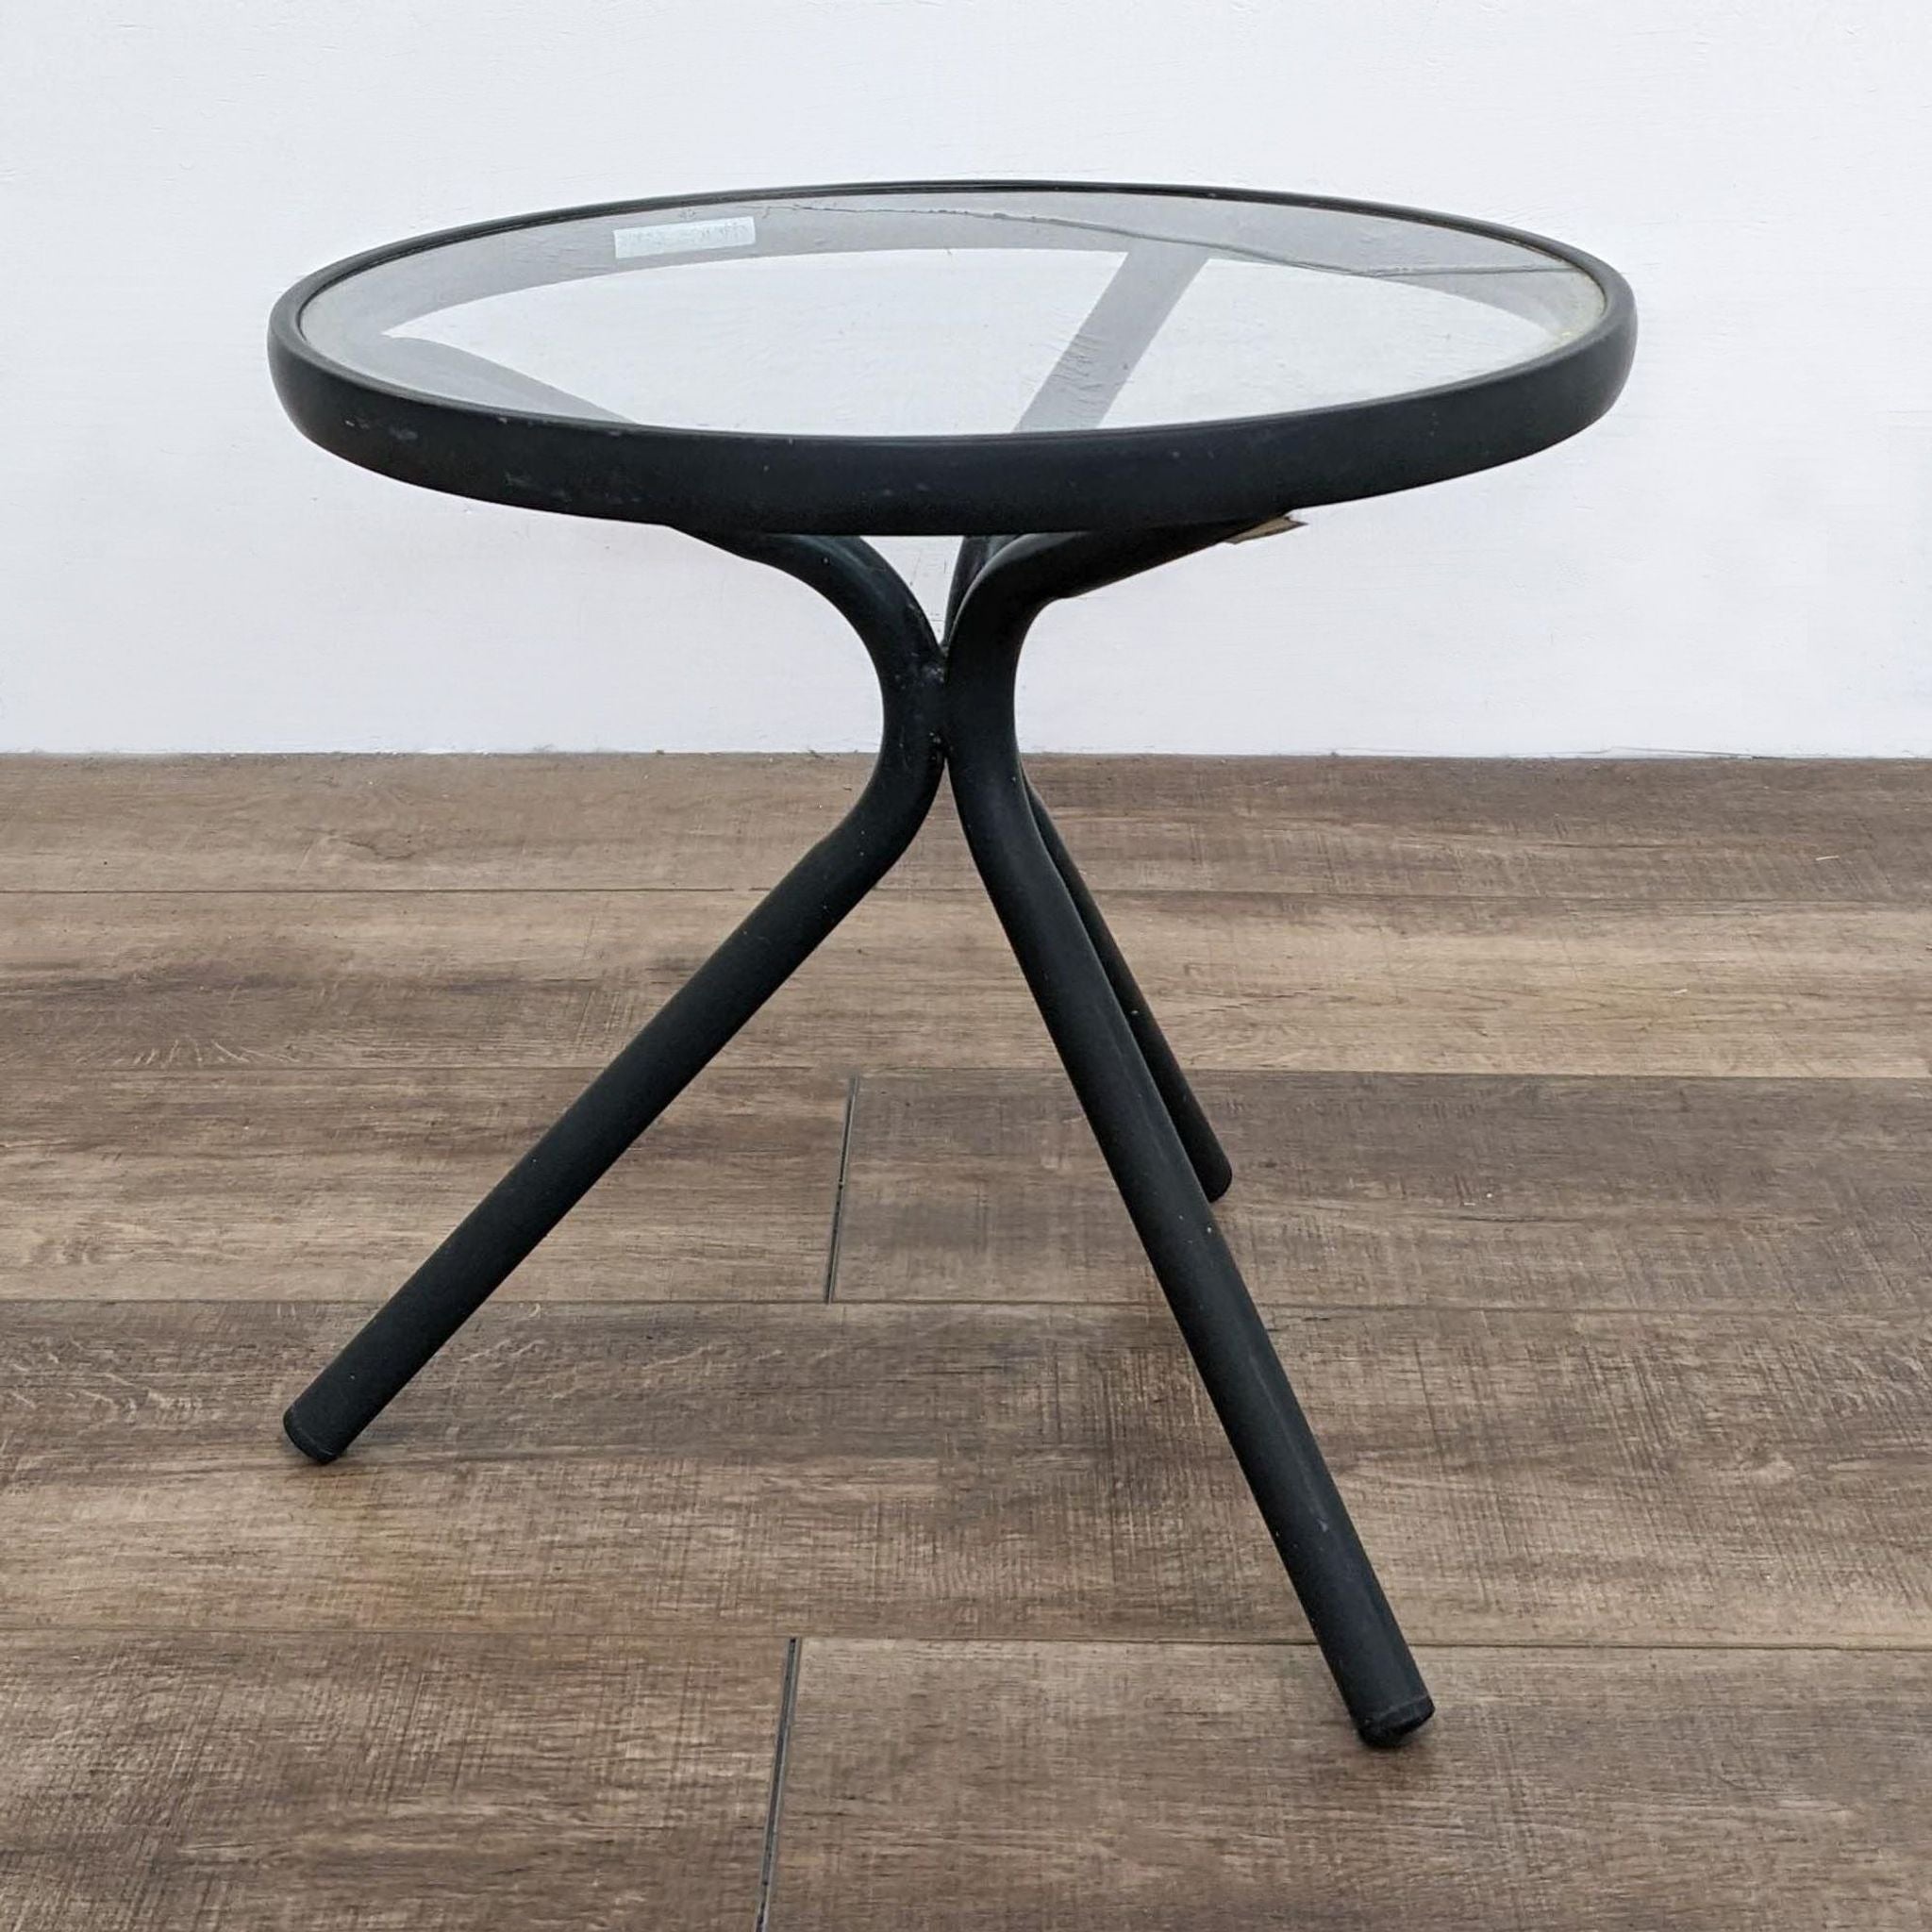 Brown Jordan 18" round aluminum frame accent table with glass top, set on a wooden floor.